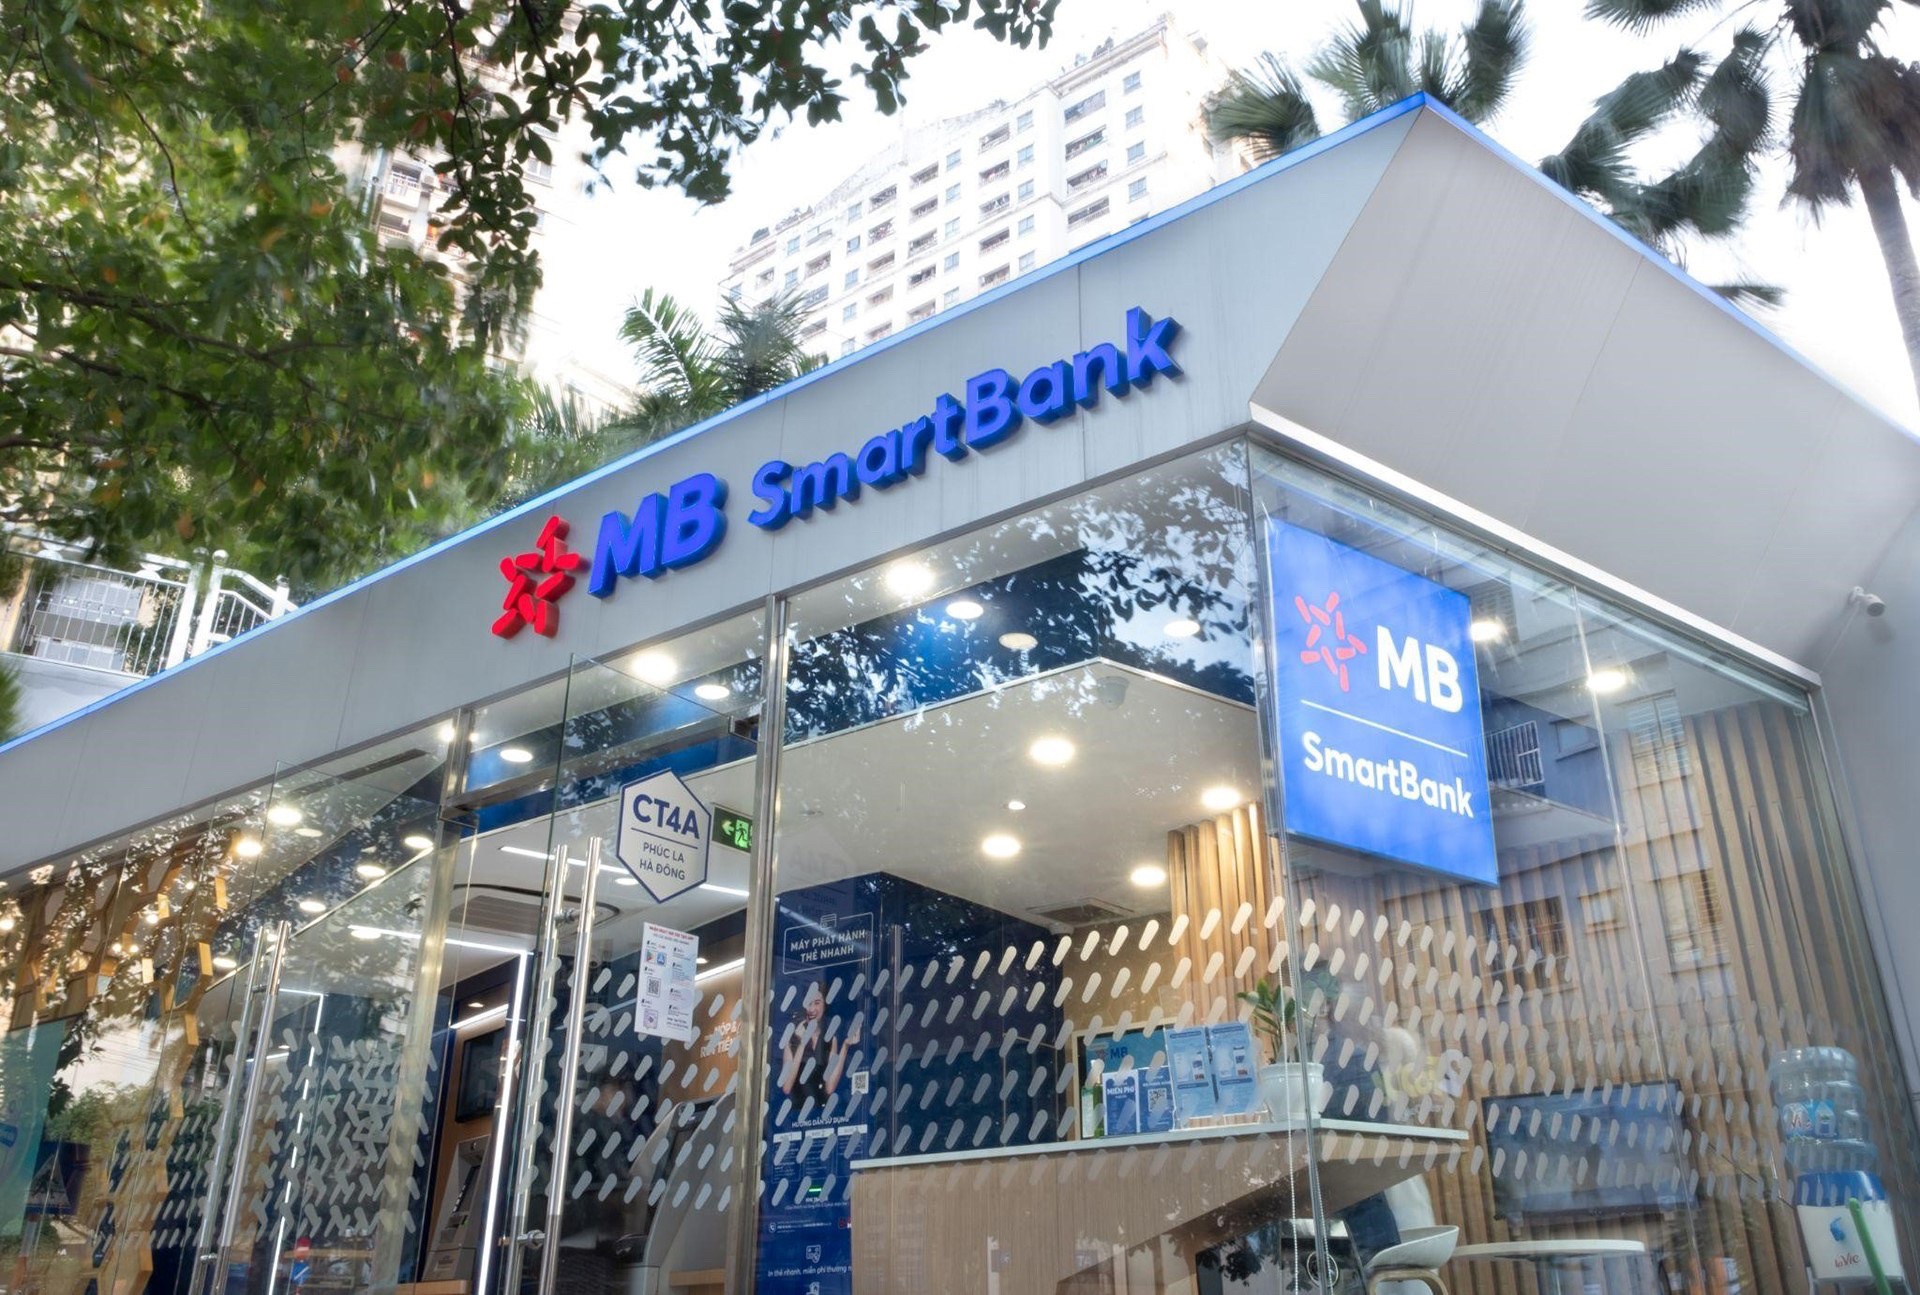 MB ranked in Top 5 most reputable banks